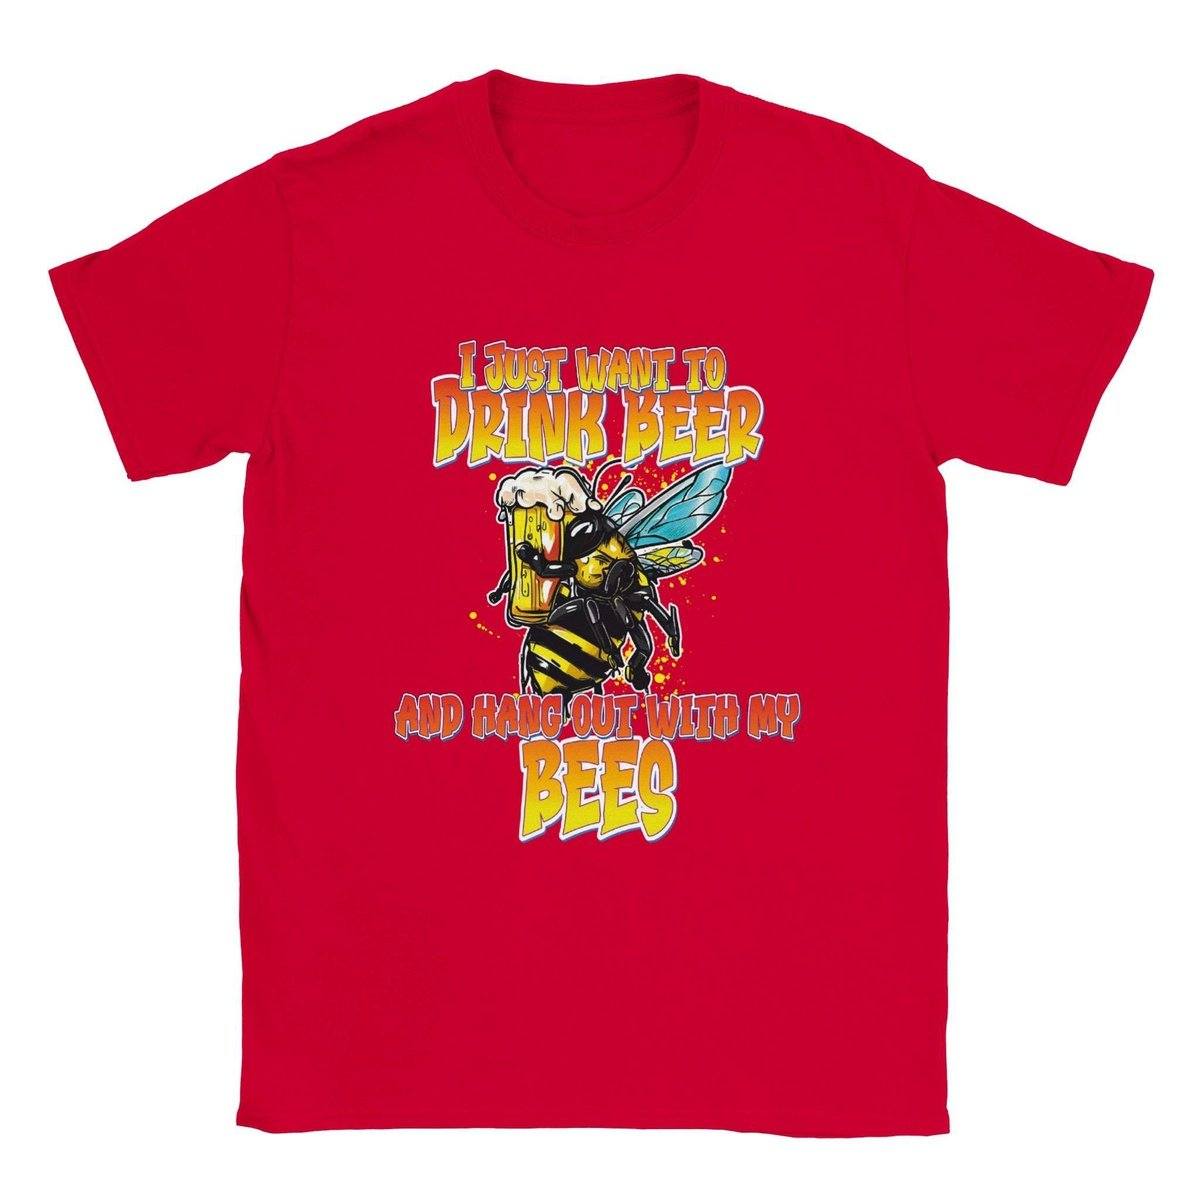 I just want to drink beer and hang out with my bees - Classic Unisex Crewneck T-shirt Australia Online Color Red / S